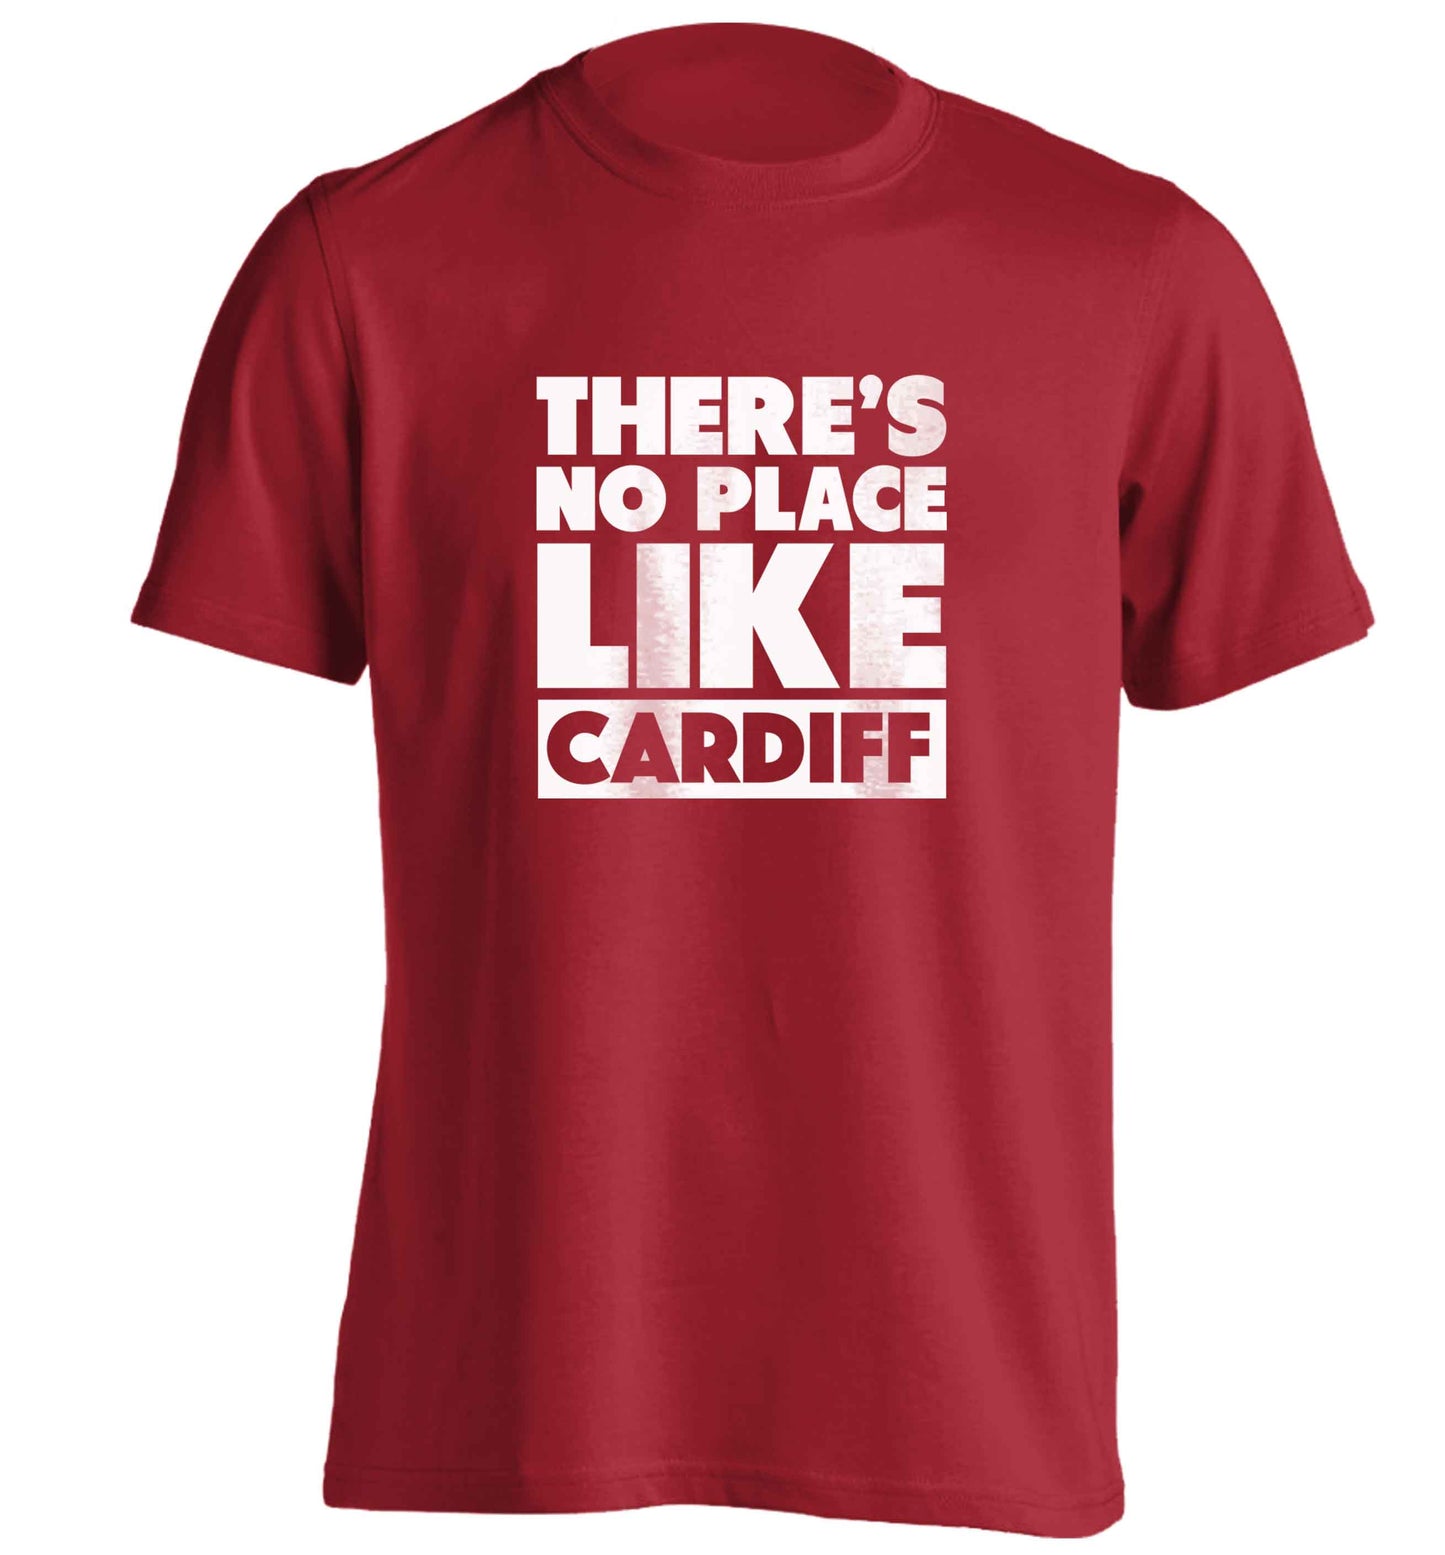 There's no place like Cardiff adults unisex red Tshirt 2XL